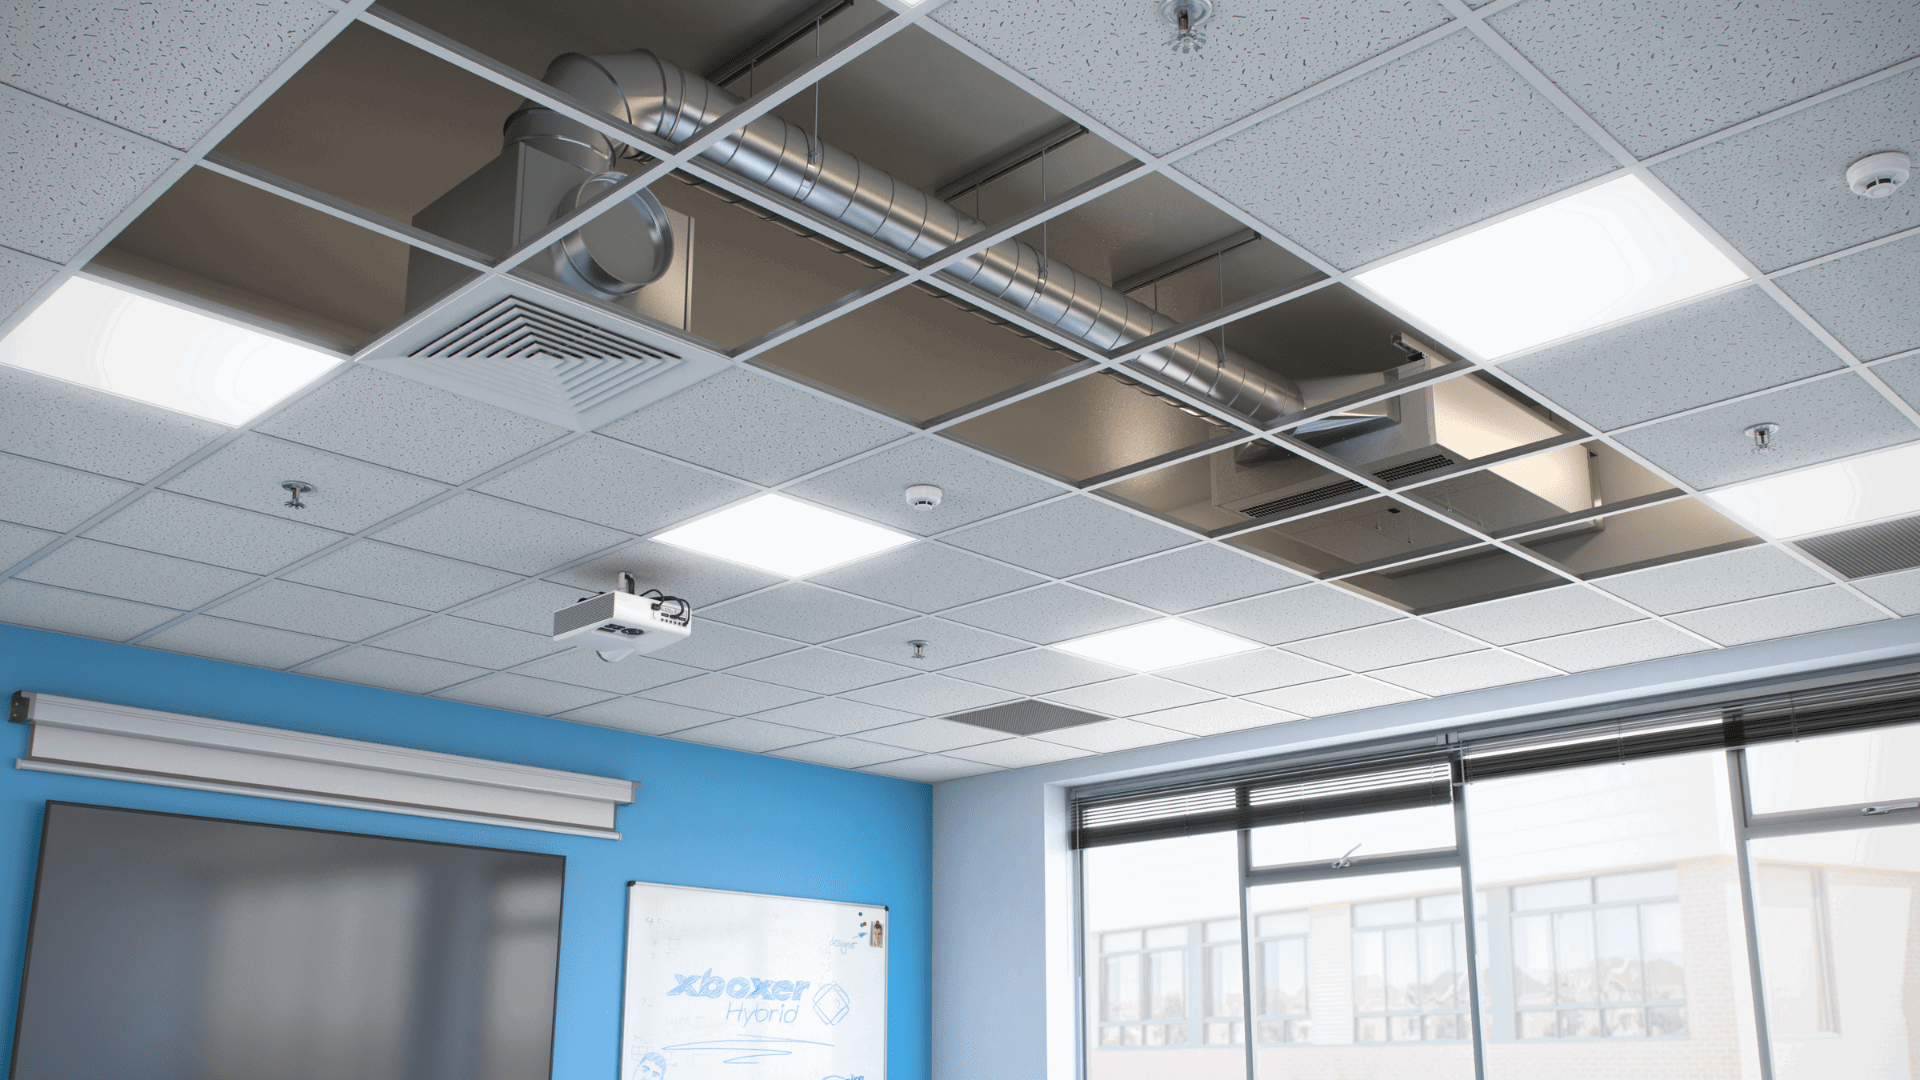 XBOXER hybrid ventilation units - Classroom Duct Installation - nuaire